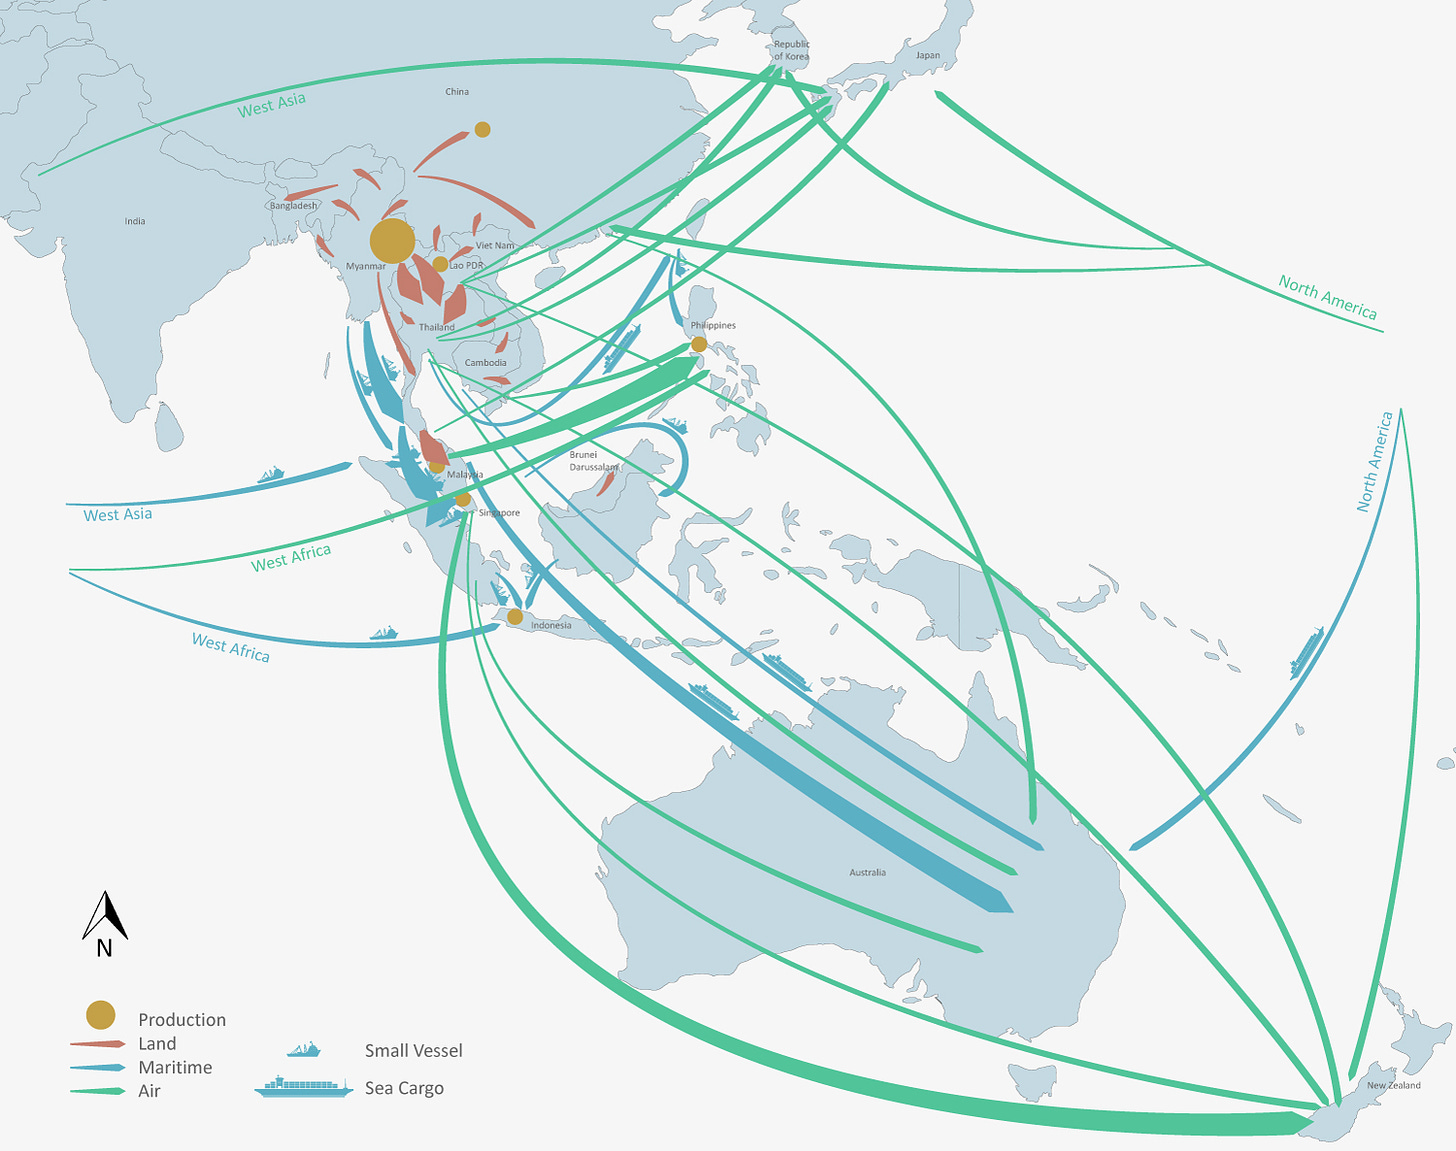 Methamphetamine trafficking routes in East and Southeast Asia, South Asia, and Oceania